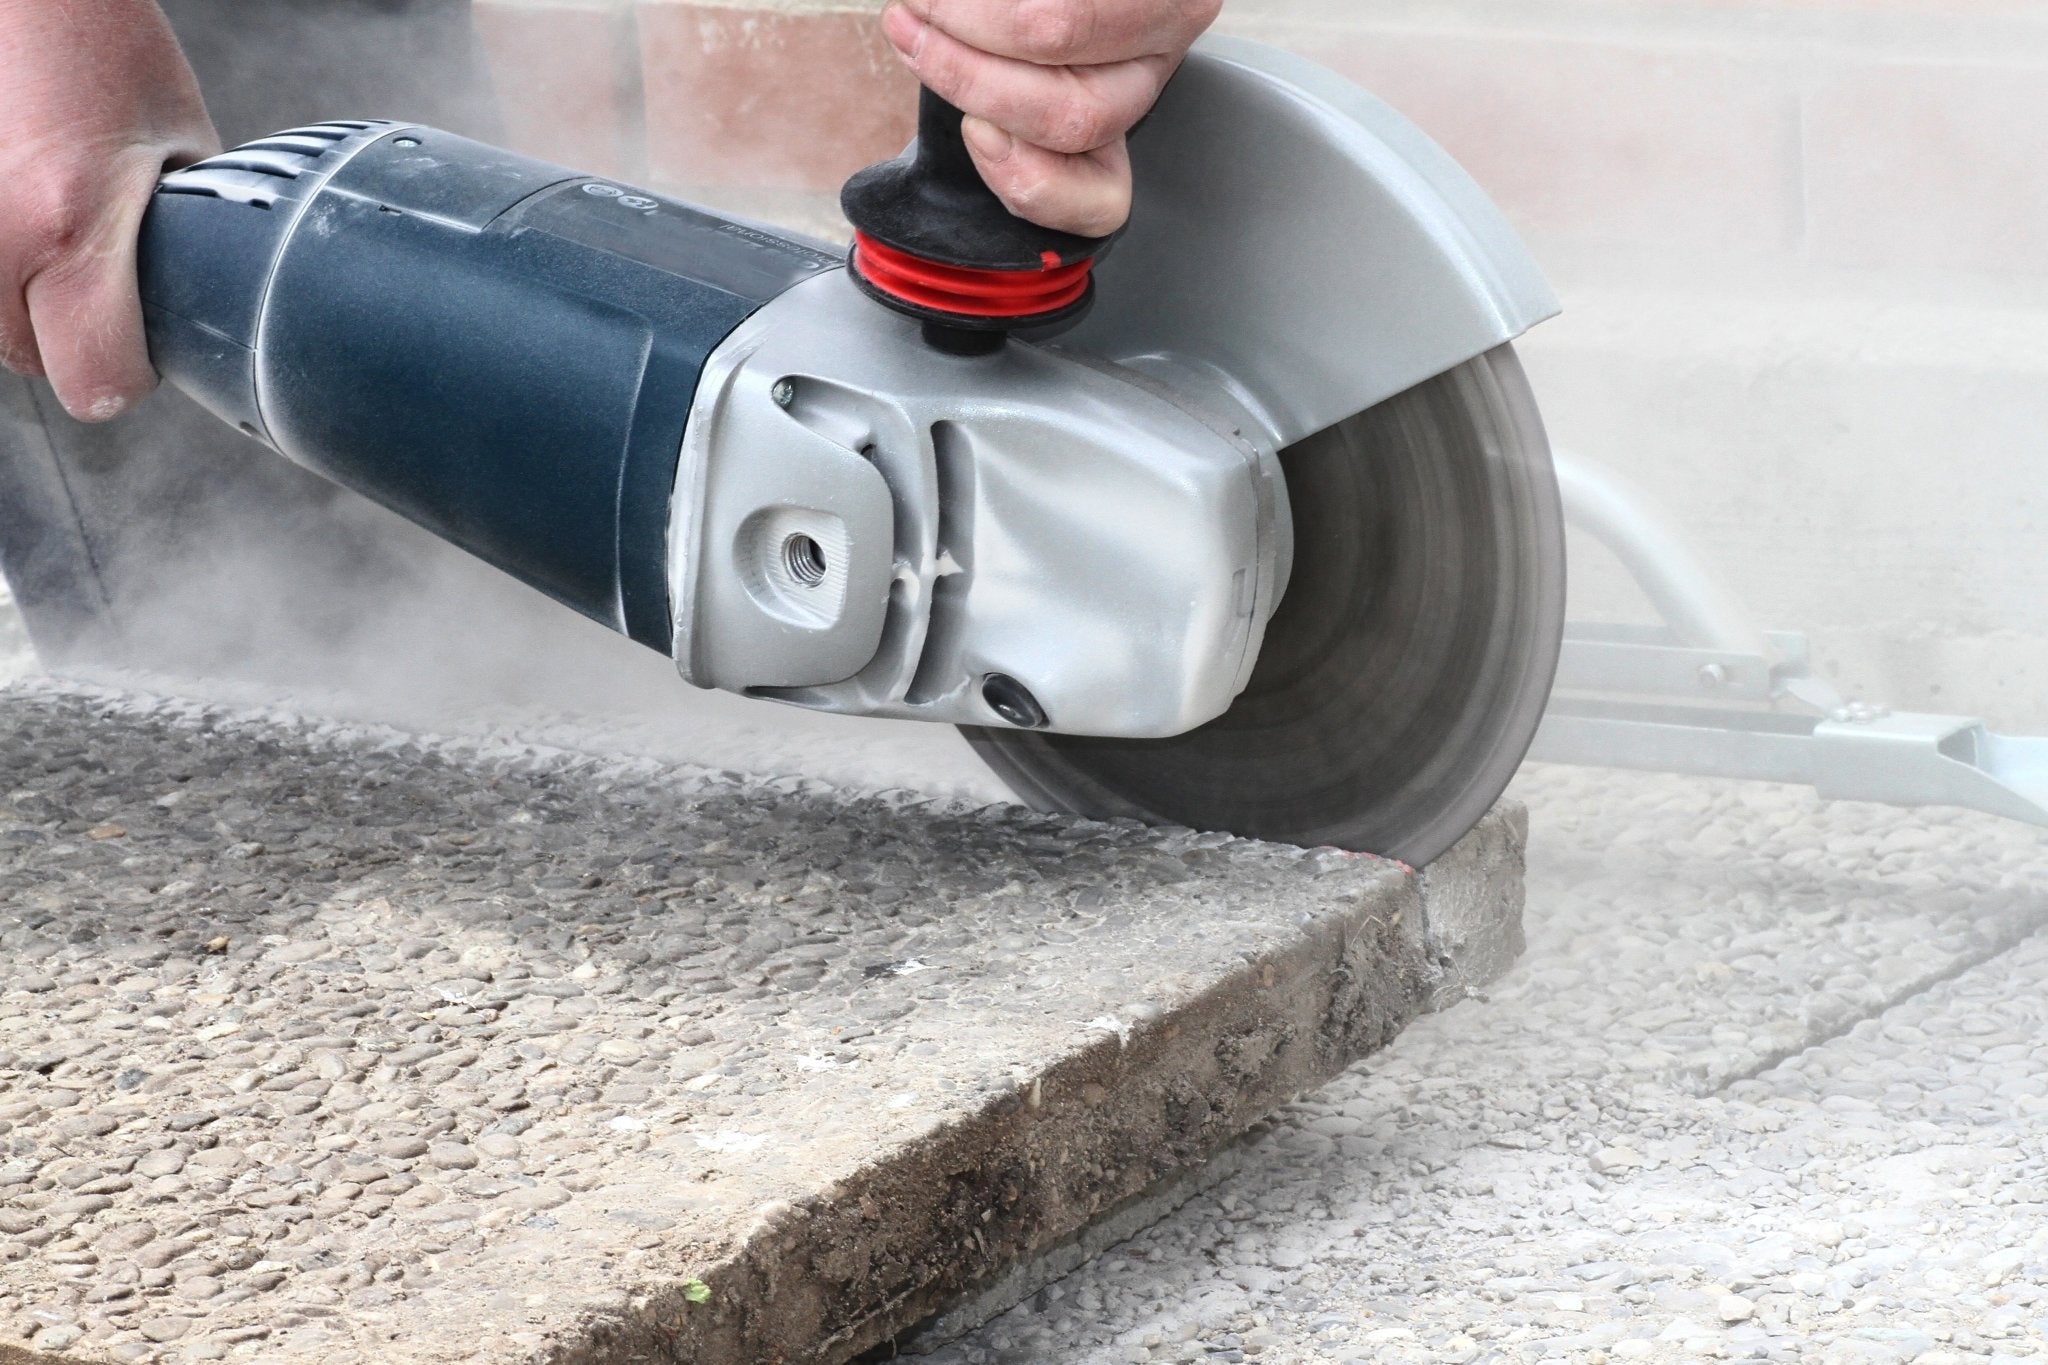 How-to Use Your Angle Grinder On Wood, Metal and More!